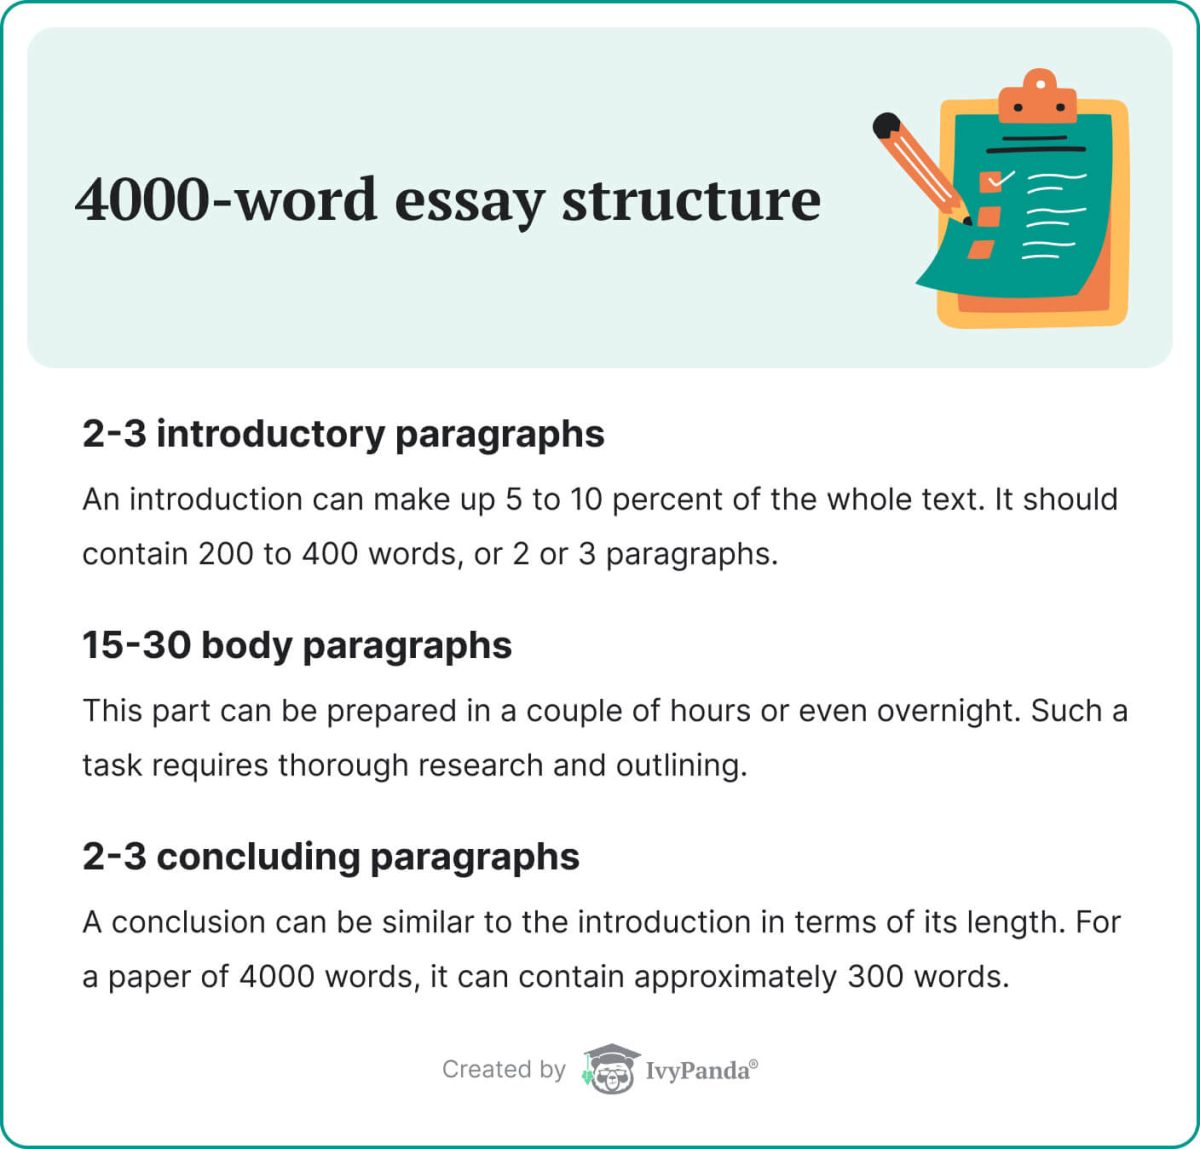 The picture describes a 4000-word essay structure.